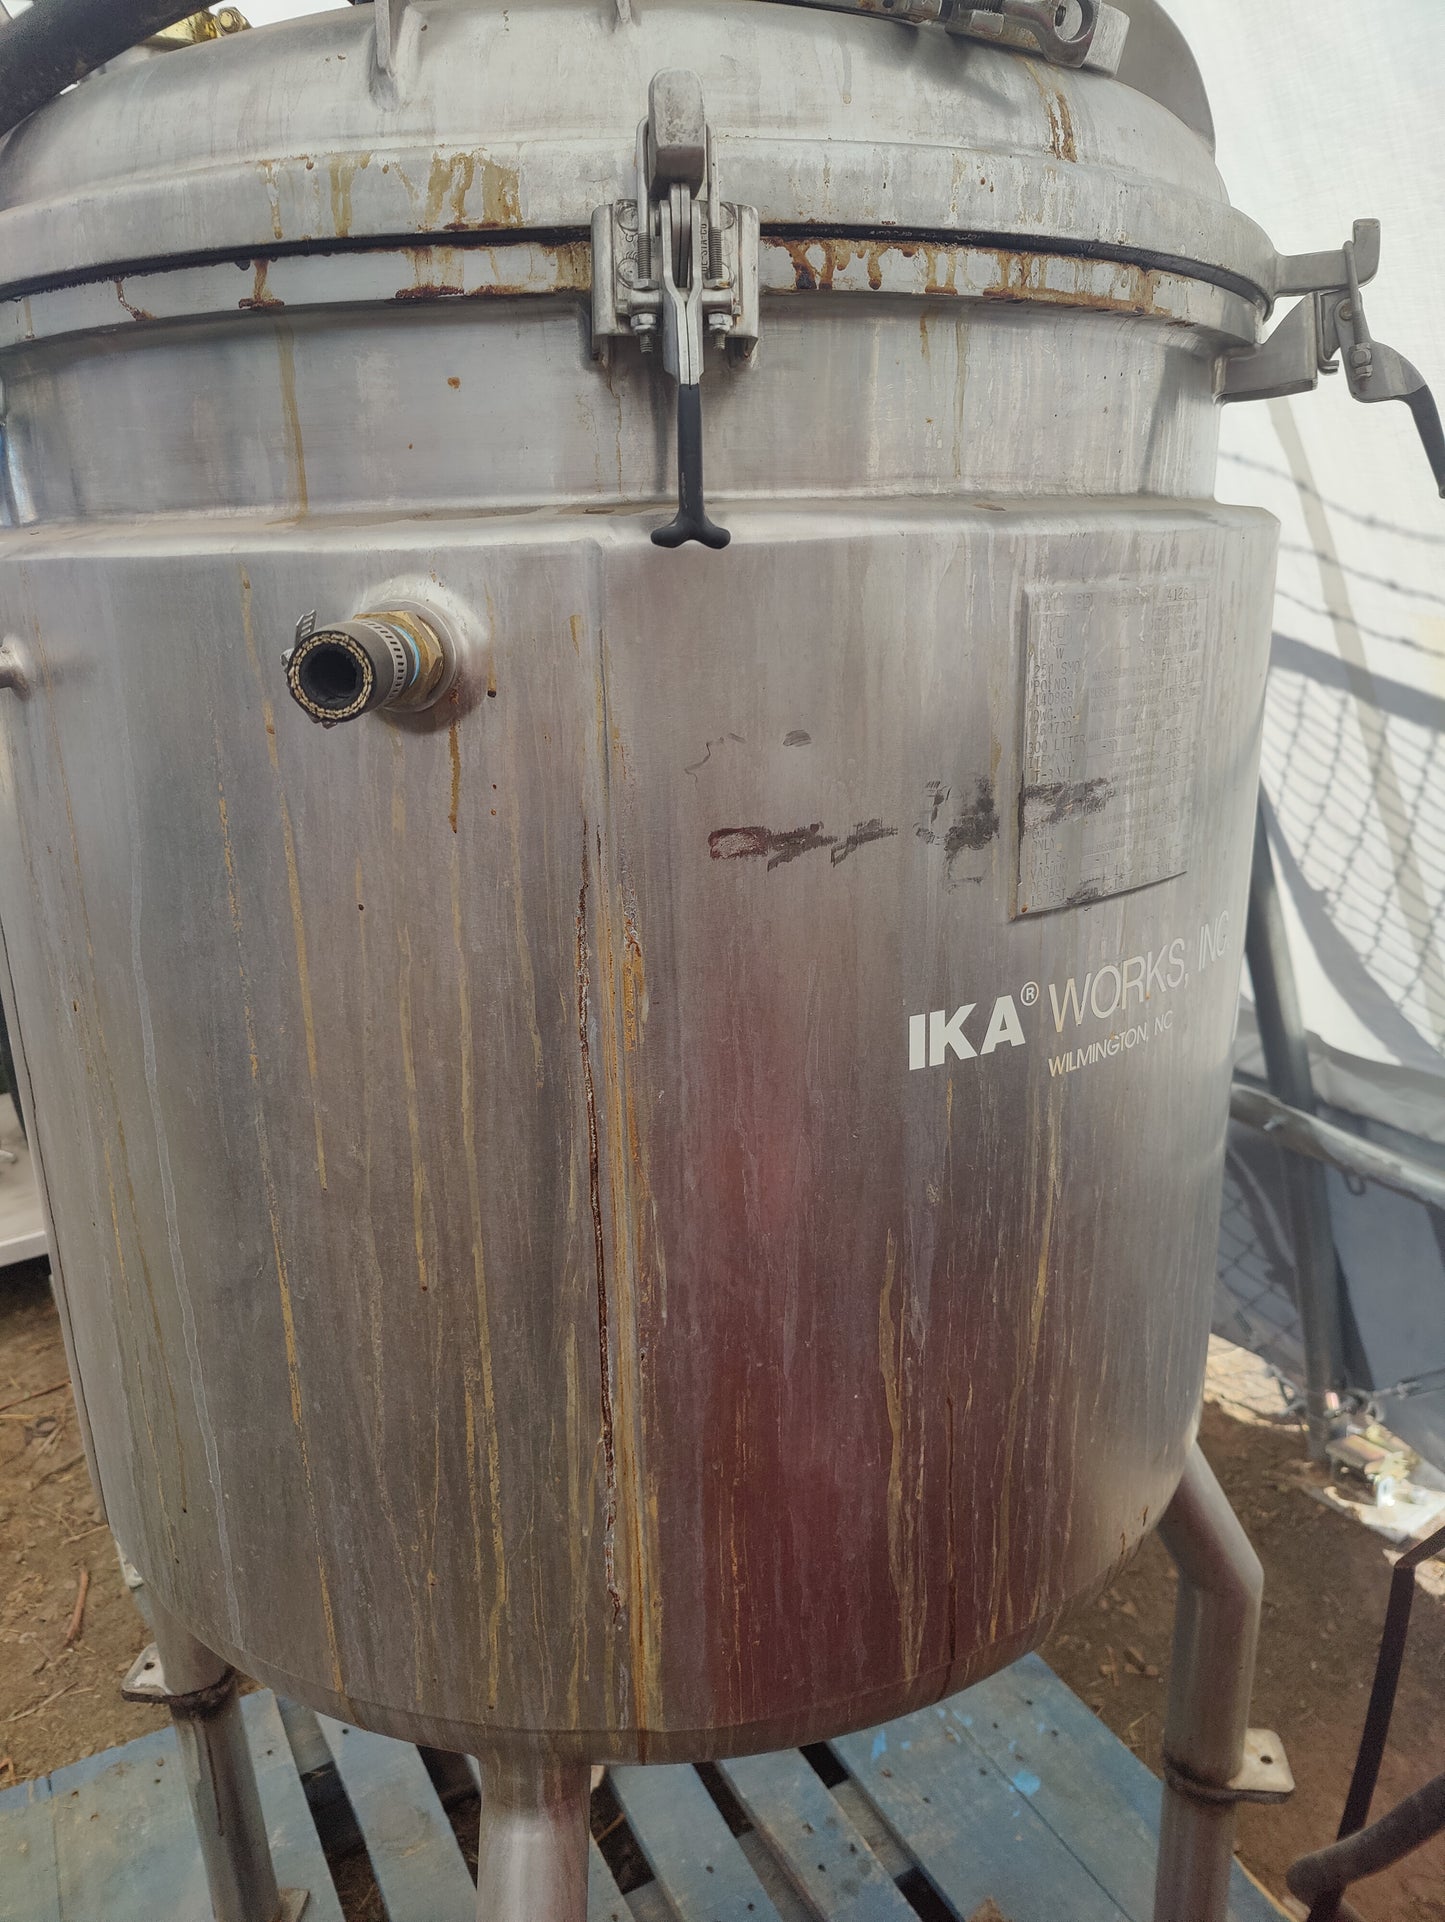 NAT'L BD 300L Pressure Tank w/ IKA Works modification for decarboxylation